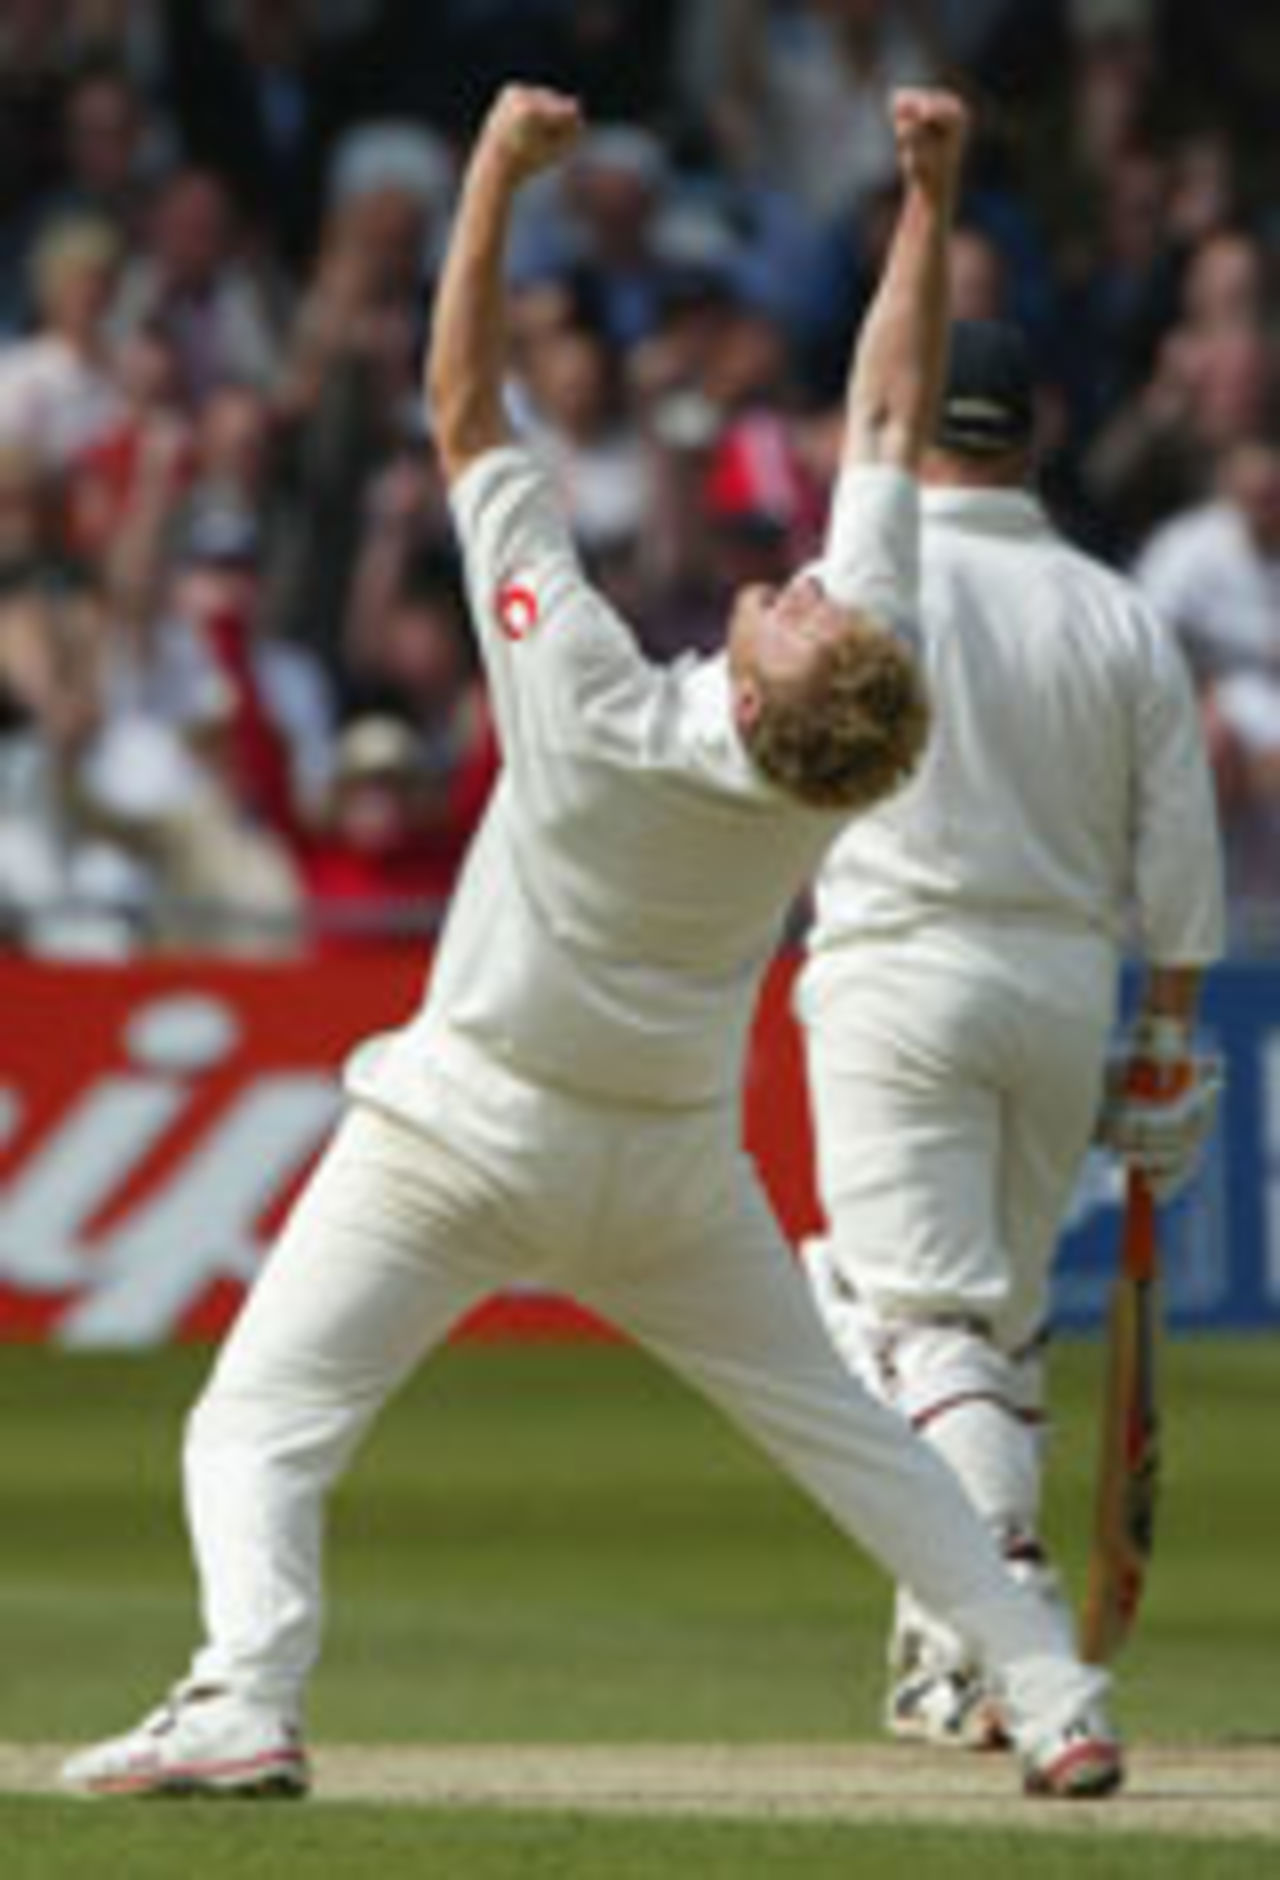 A fired-up Andrew Flintoff celebrates a wicket, England v New Zealand, 3rd Test, Trent Bridge, June 12 2004